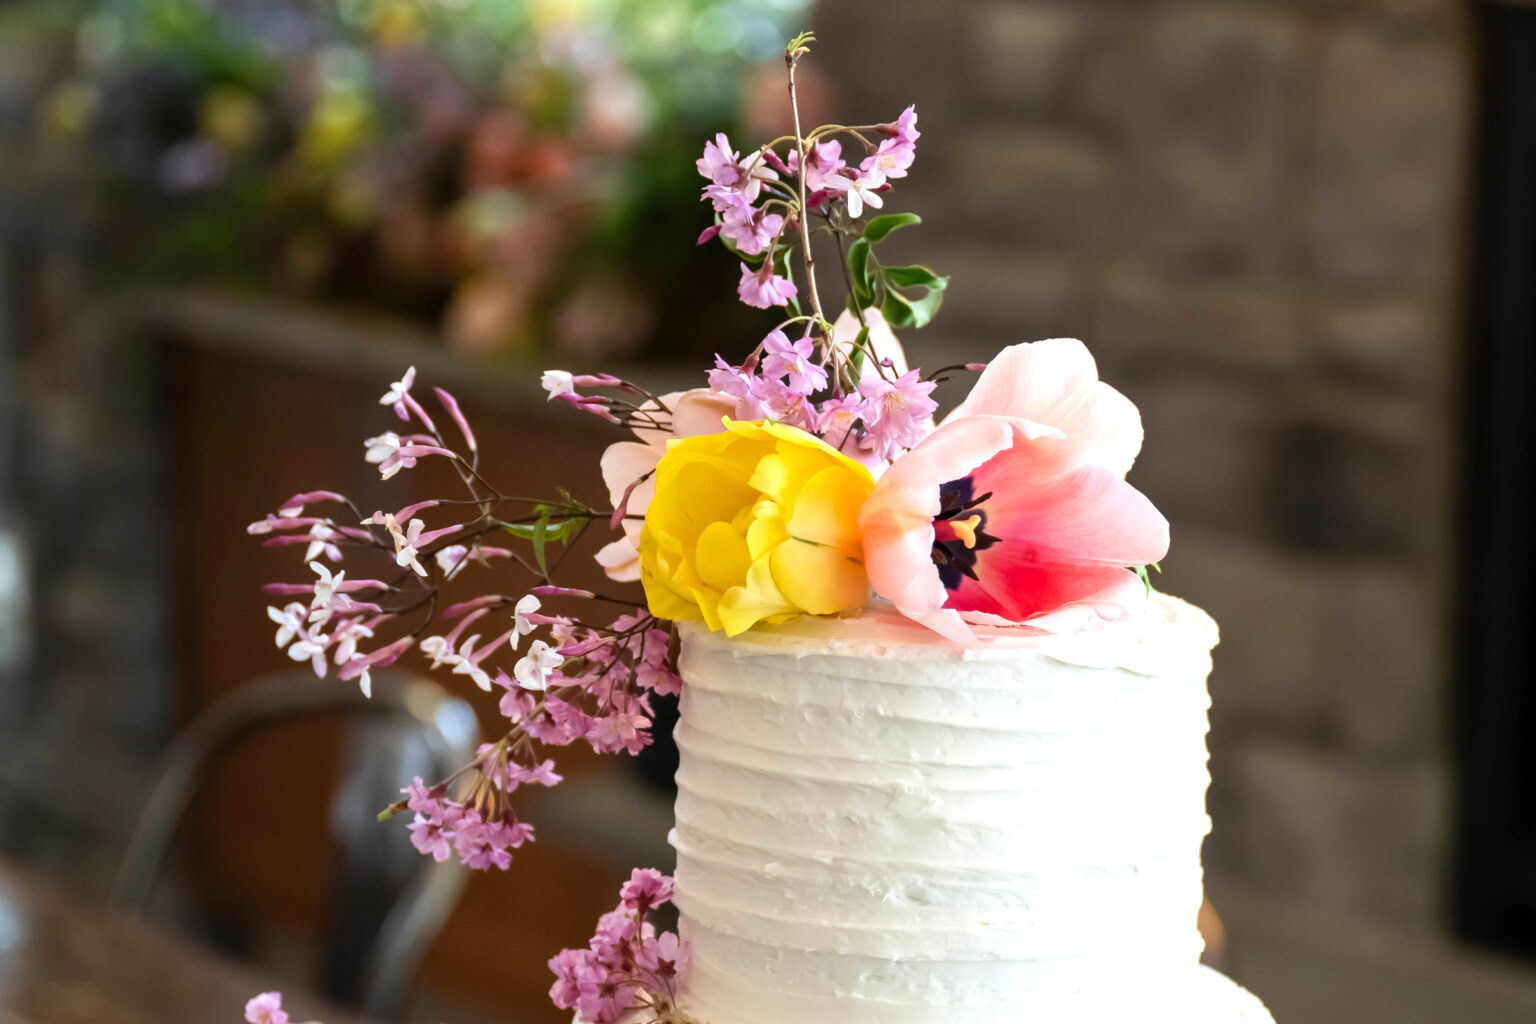 Cake with floral topper.